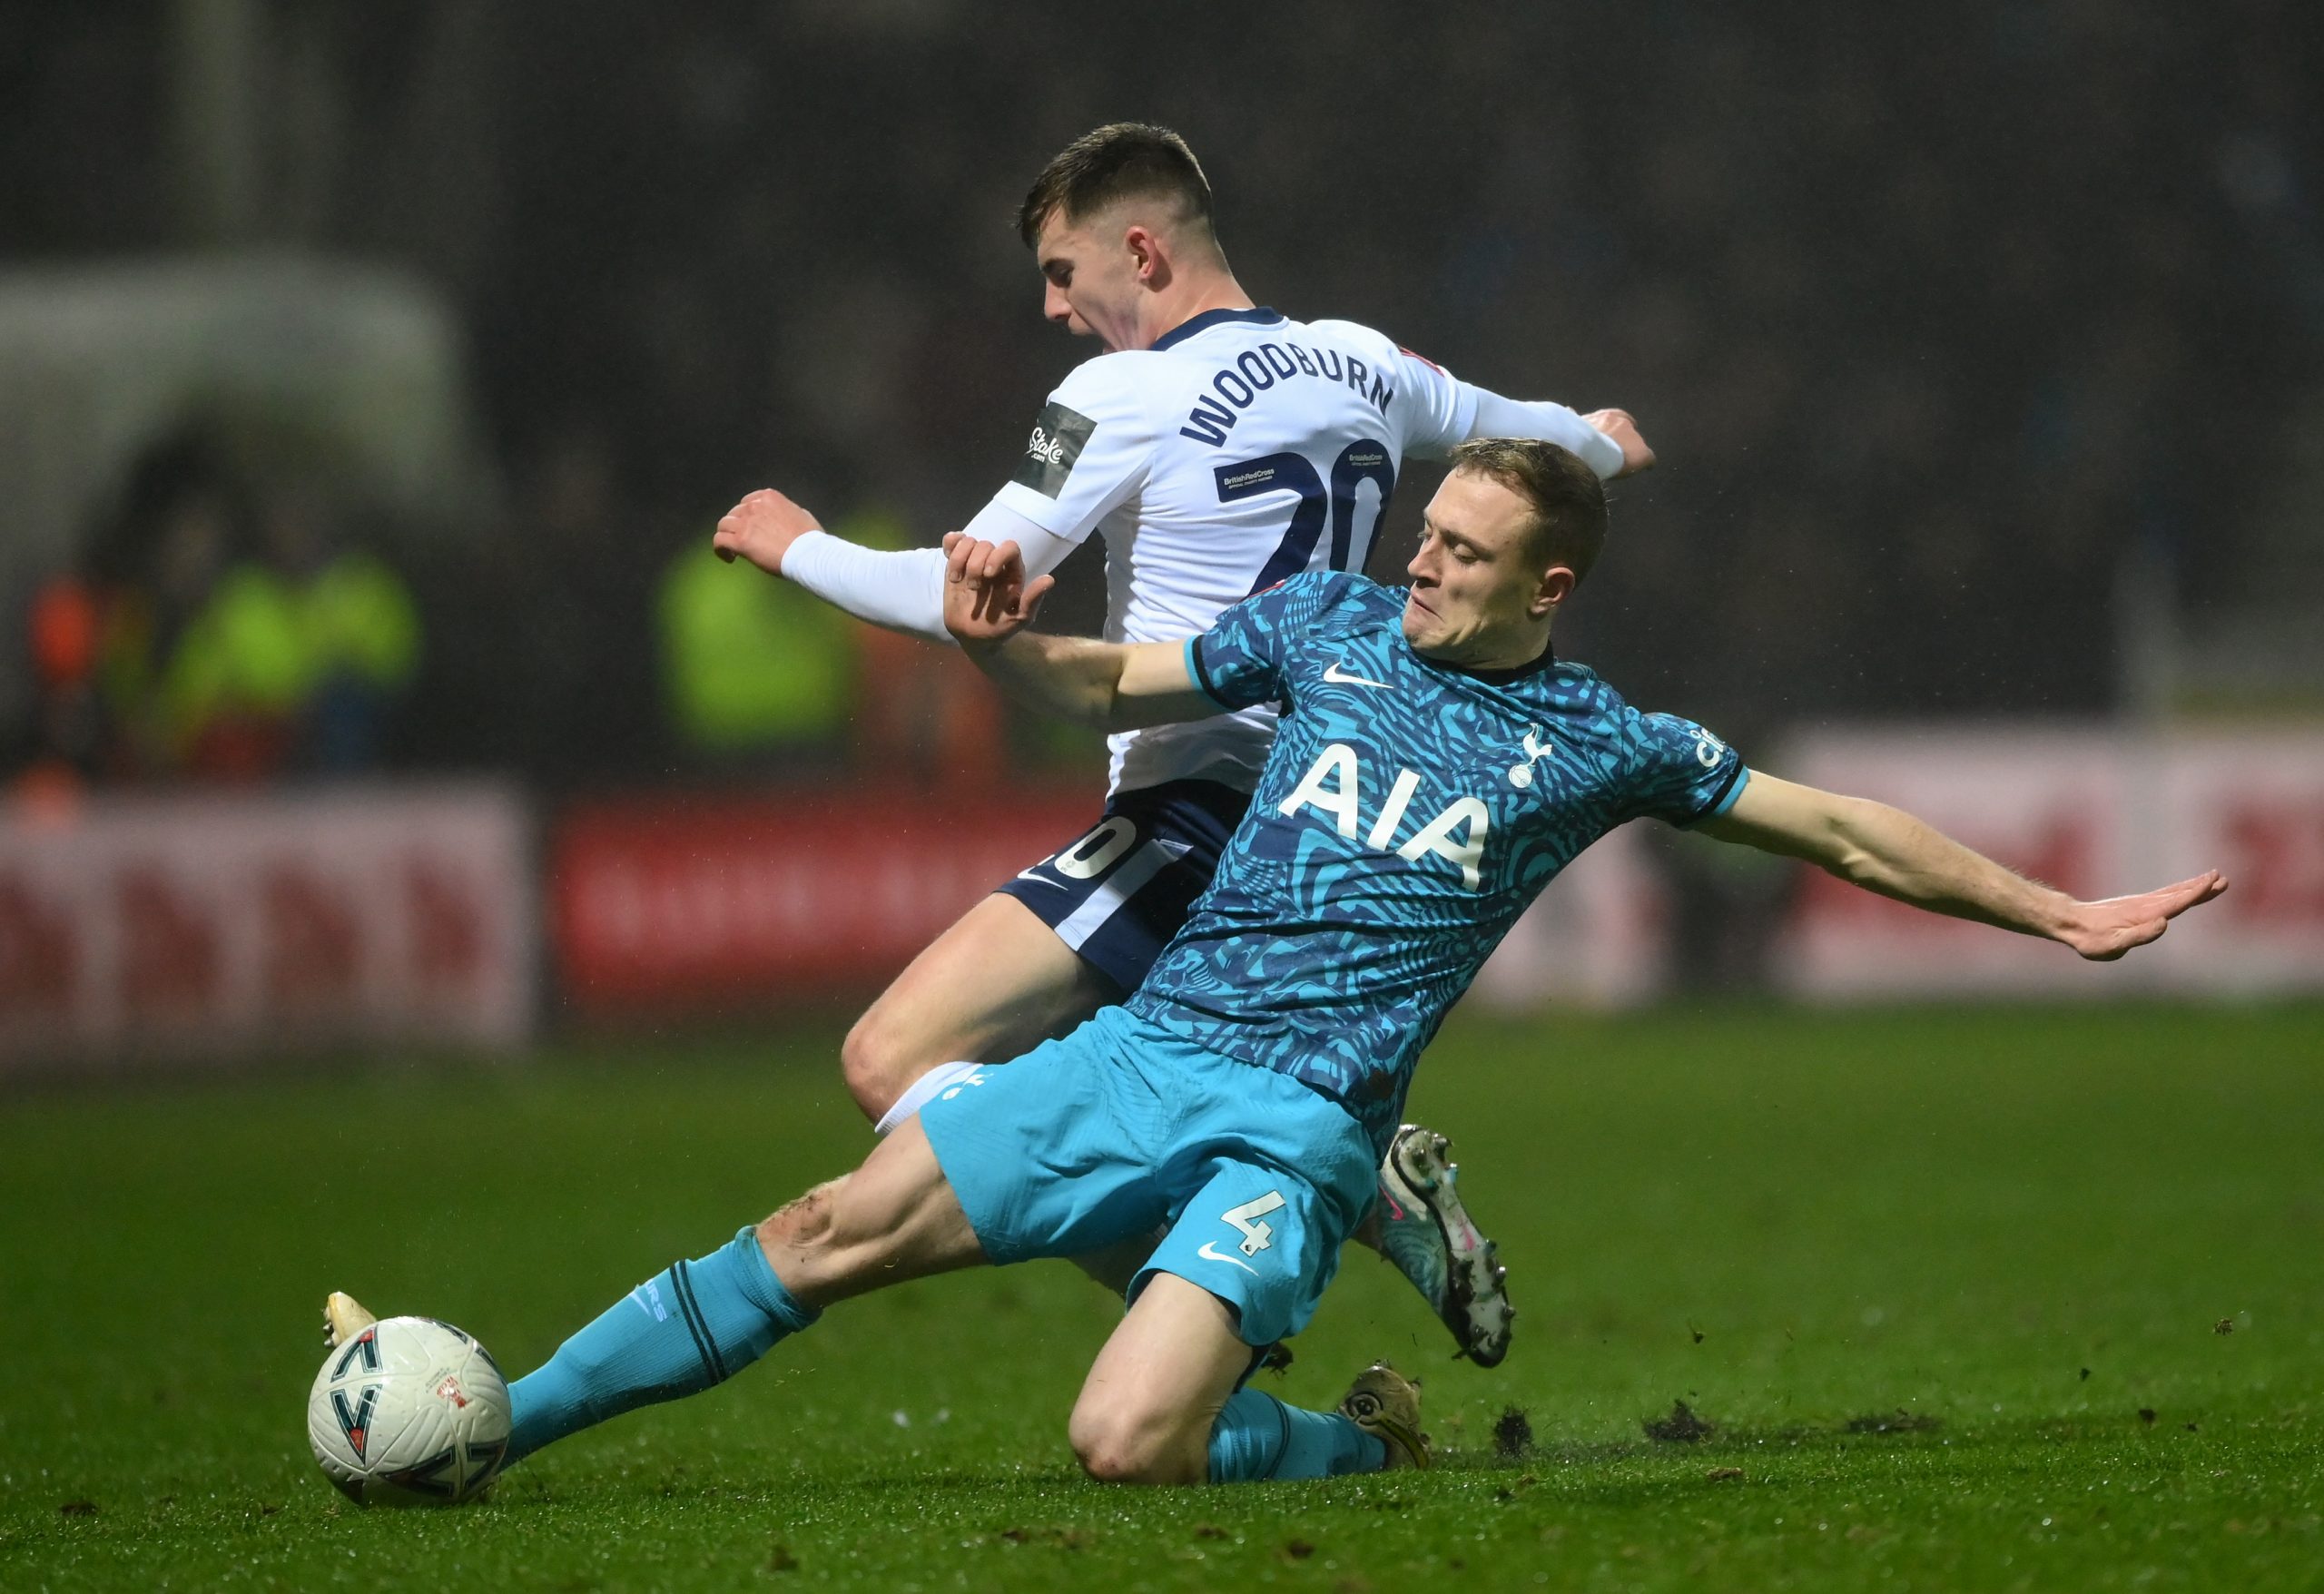 Oliver Skipp of Tottenham Hotspur is challenged by Ben Woodburn of Preston North End.